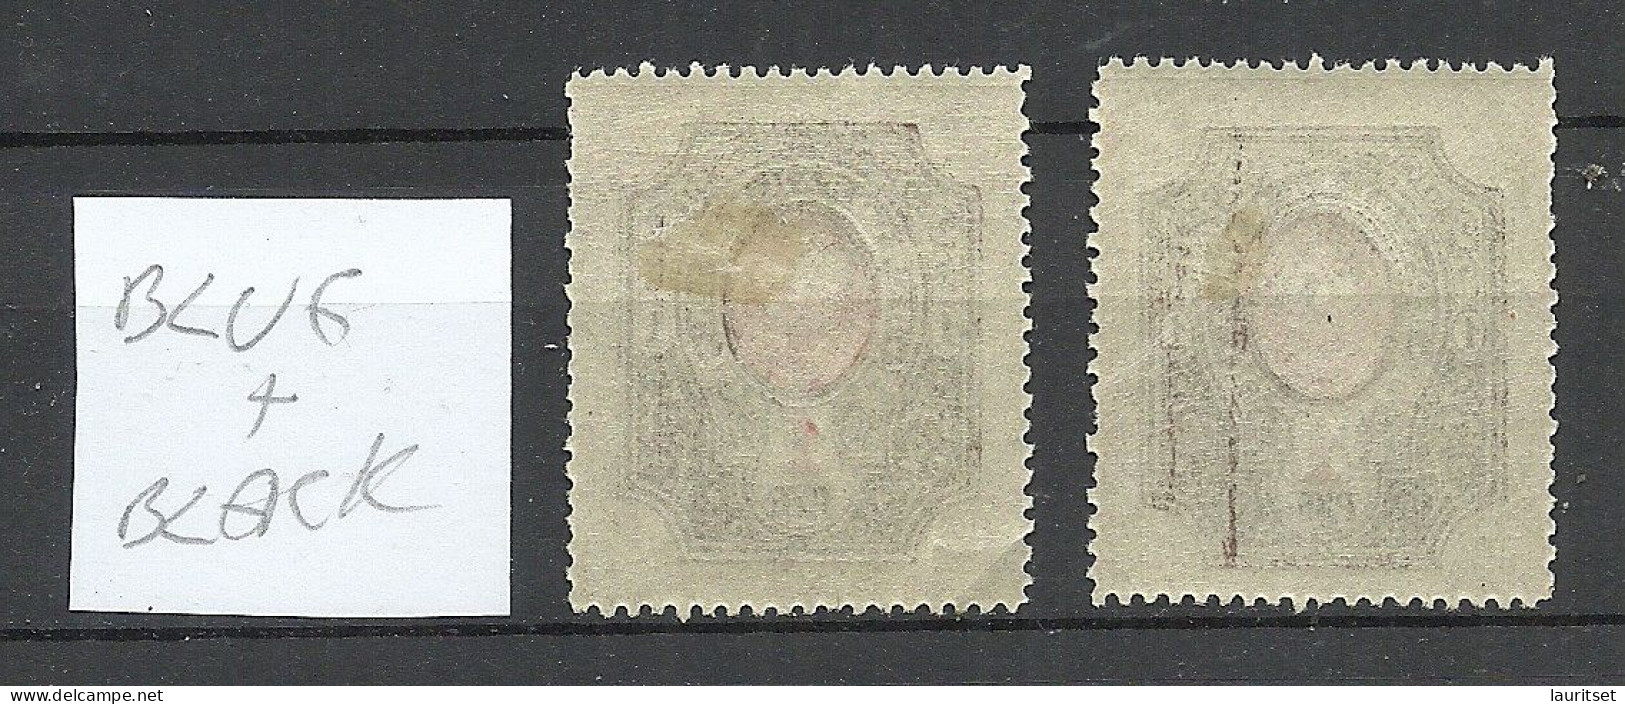 Russia RUSSLAND 1920 Civil War Wrangel Army Camp Post At Gallipoli 10 000 On 1 R. Perforated Black + Blue OPT * - Wrangel Army